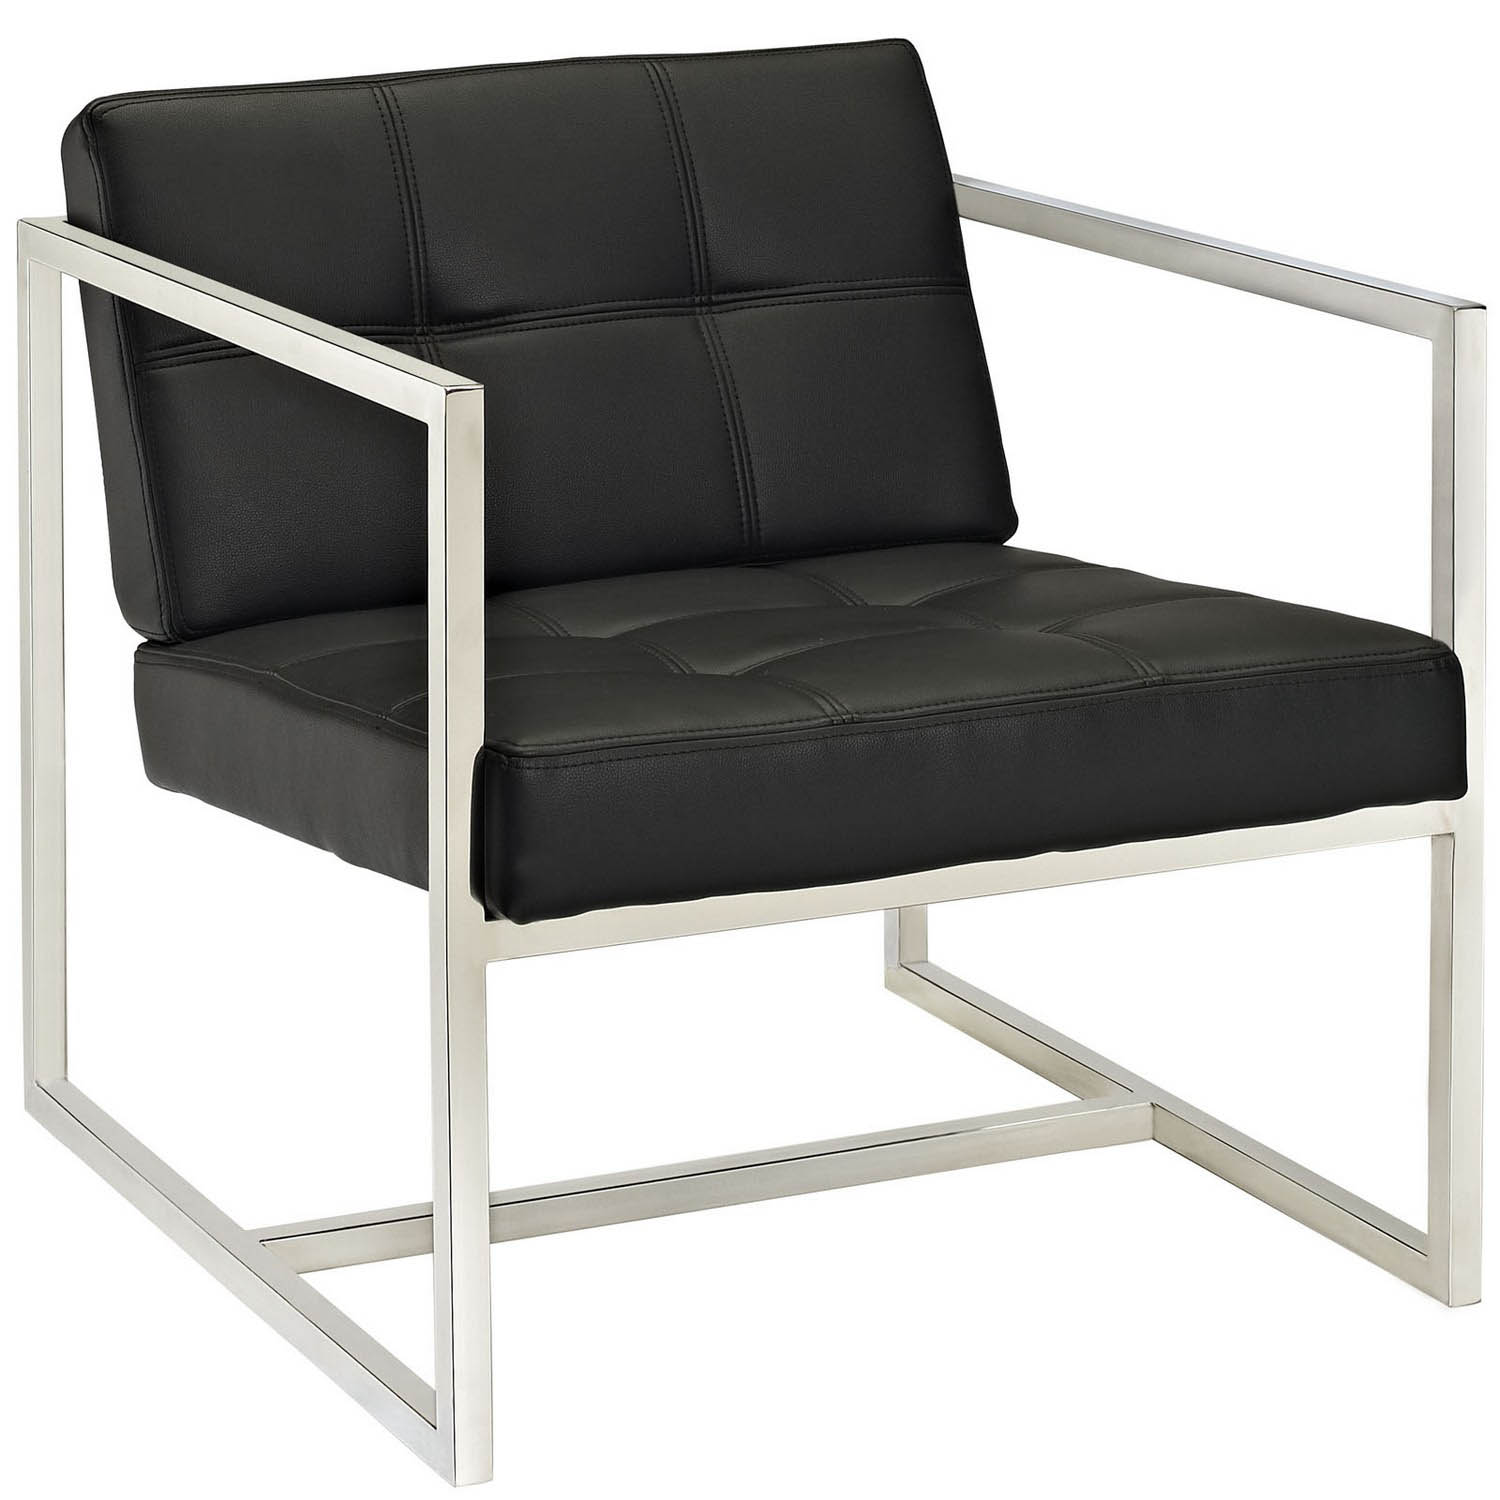 Modway Hover Lounge Chair - Black